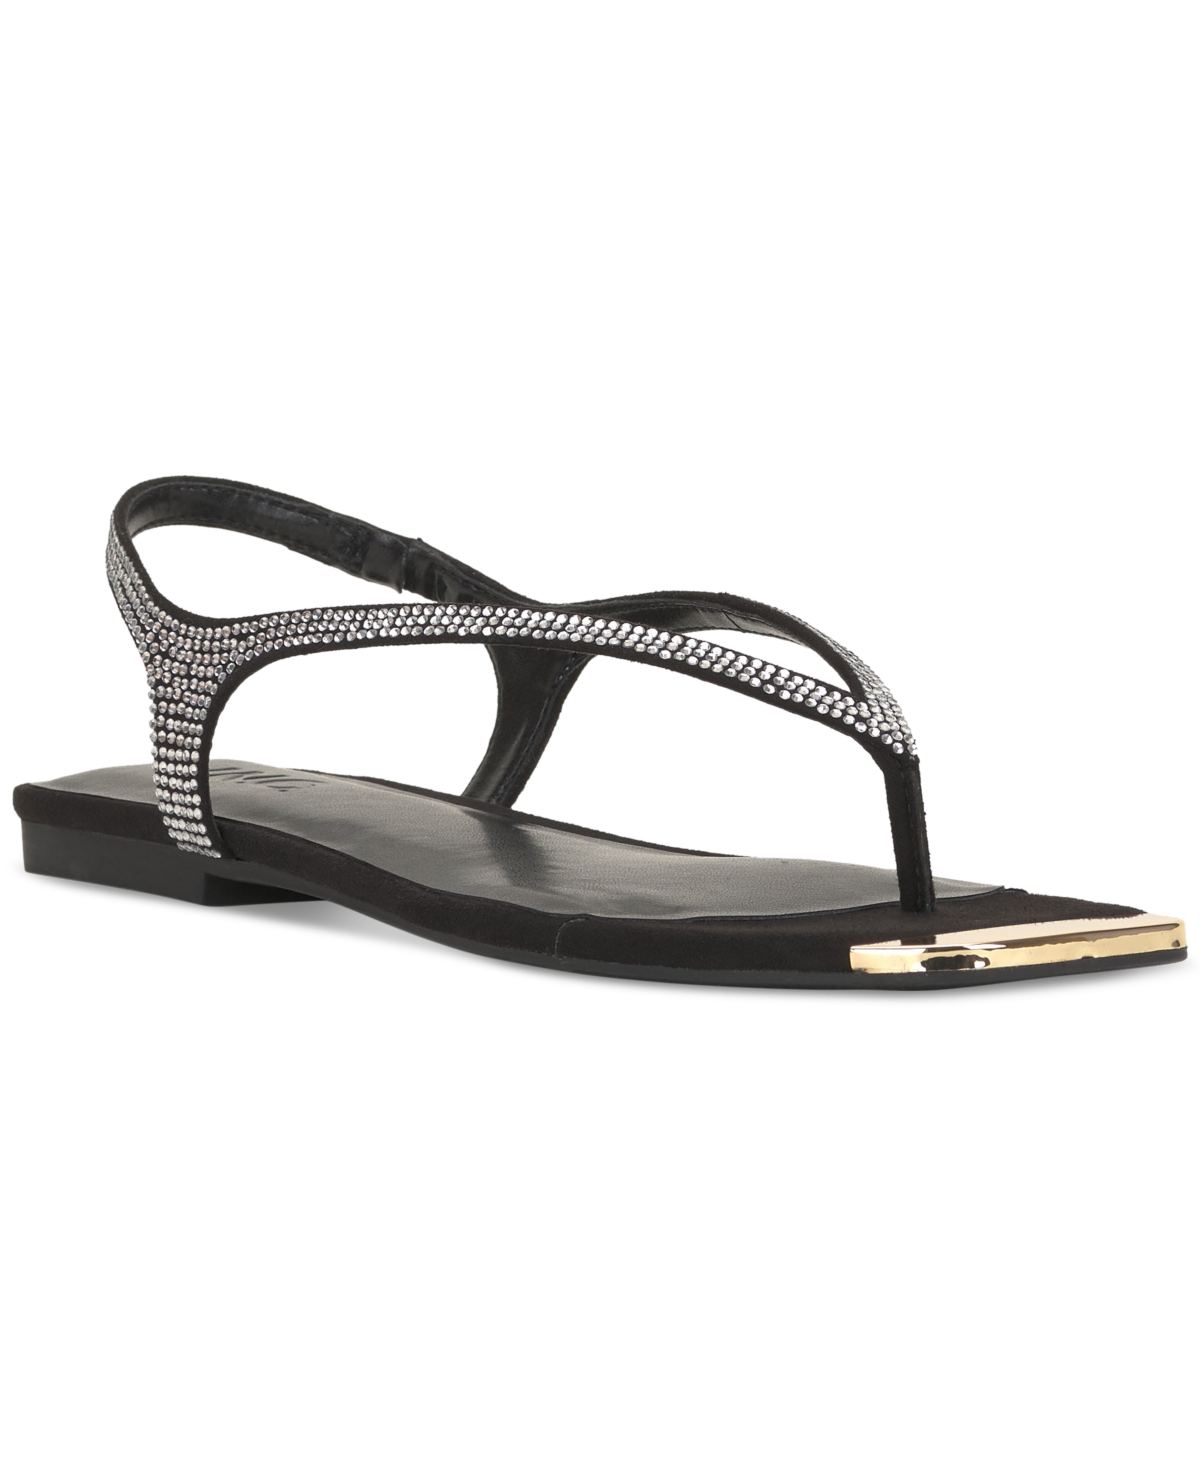 Women's Pasca Flat Sandals, Created for Macy's - Black Bling